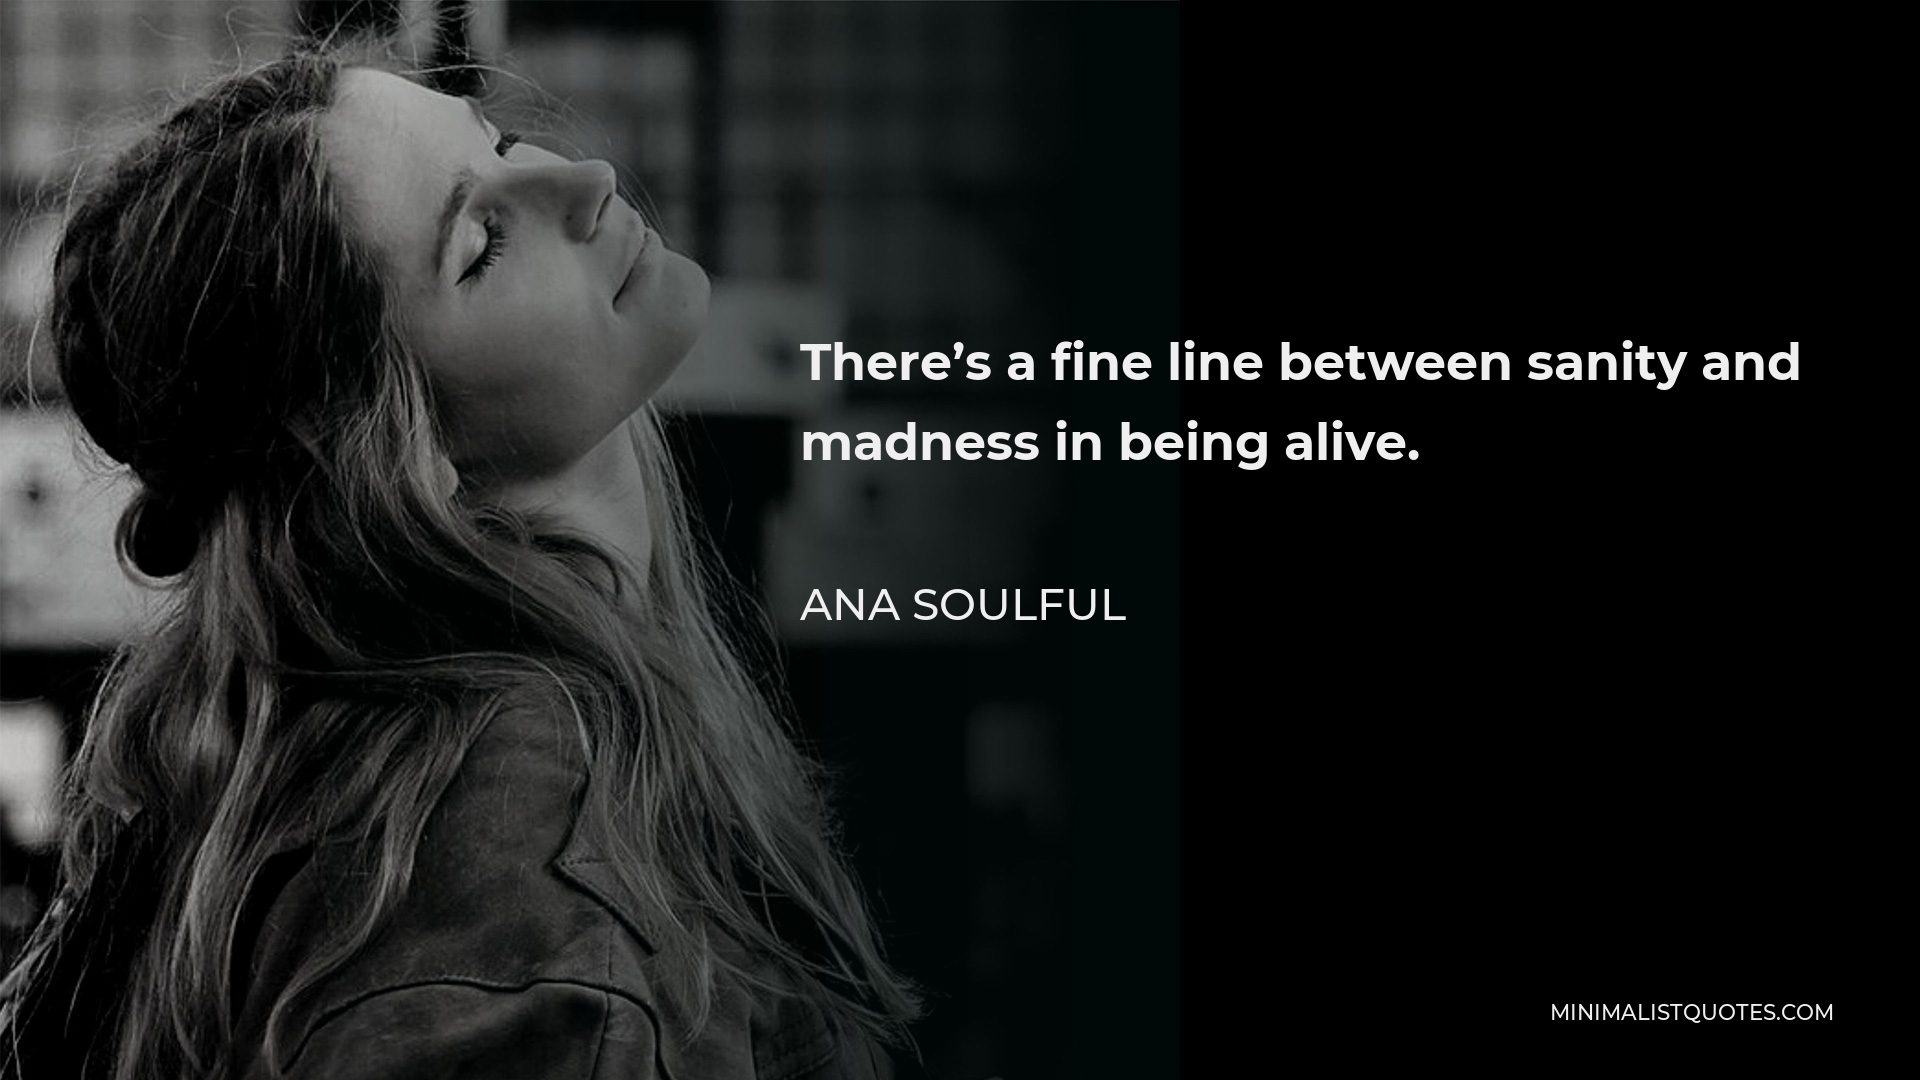 Ana Soulful Quote - There’s a fine line between sanity and madness in being alive.